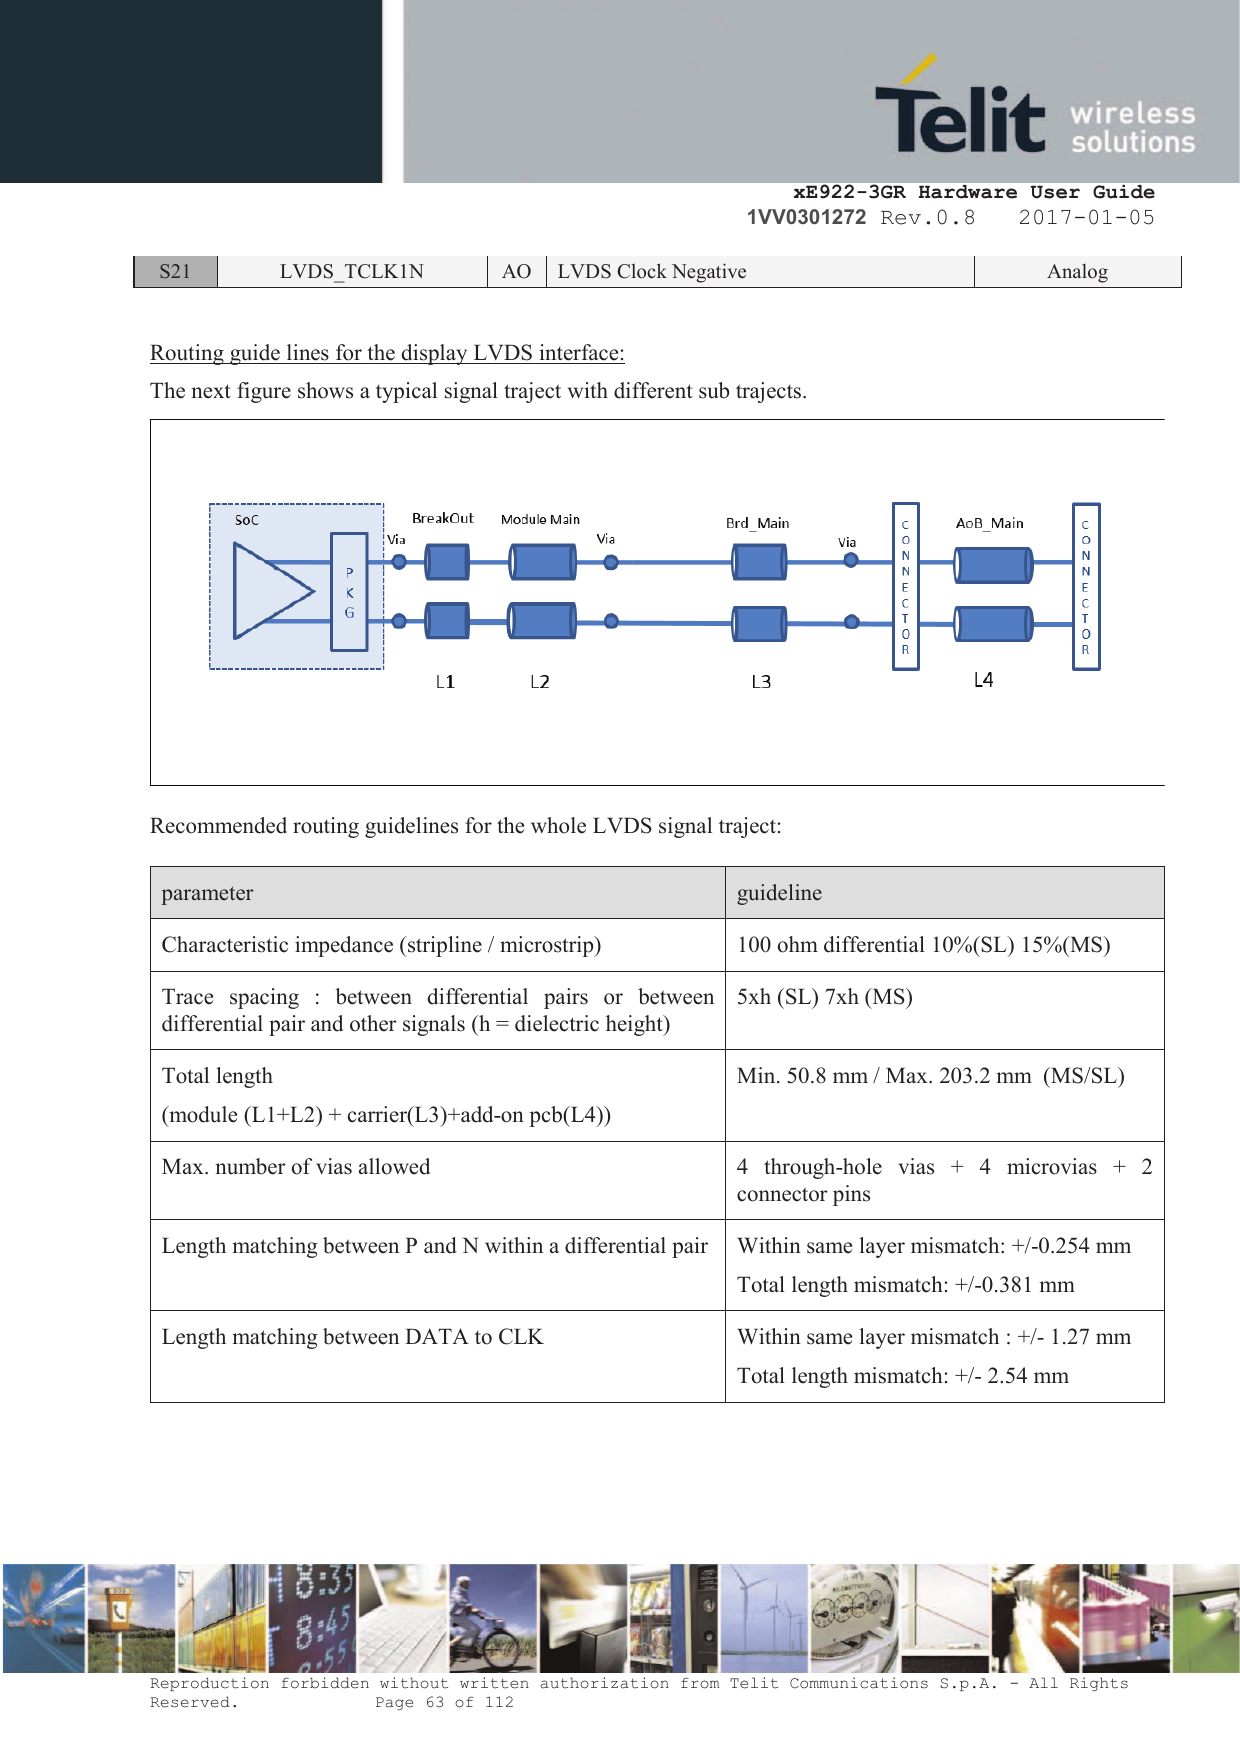     xE922-3GR Hardware User Guide 1VV0301272 Rev.0.8   2017-01-05 Reproduction forbidden without written authorization from Telit Communications S.p.A. - All Rights Reserved.    Page 63 of 112  S21 LVDS_TCLK1N AO LVDS Clock Negative Analog  Routing guide lines for the display LVDS interface: The next figure shows a typical signal traject with different sub trajects.   Recommended routing guidelines for the whole LVDS signal traject:  parameter  guideline Characteristic impedance (stripline / microstrip) 100 ohm differential 10%(SL) 15%(MS) Trace  spacing  :  between  differential  pairs  or  between differential pair and other signals (h = dielectric height) 5xh (SL) 7xh (MS) Total length  (module (L1+L2) + carrier(L3)+add-on pcb(L4)) Min. 50.8 mm / Max. 203.2 mm  (MS/SL) Max. number of vias allowed 4  through-hole  vias  +  4  microvias  +  2 connector pins Length matching between P and N within a differential pair Within same layer mismatch: +/-0.254 mm Total length mismatch: +/-0.381 mm Length matching between DATA to CLK Within same layer mismatch : +/- 1.27 mm Total length mismatch: +/- 2.54 mm     